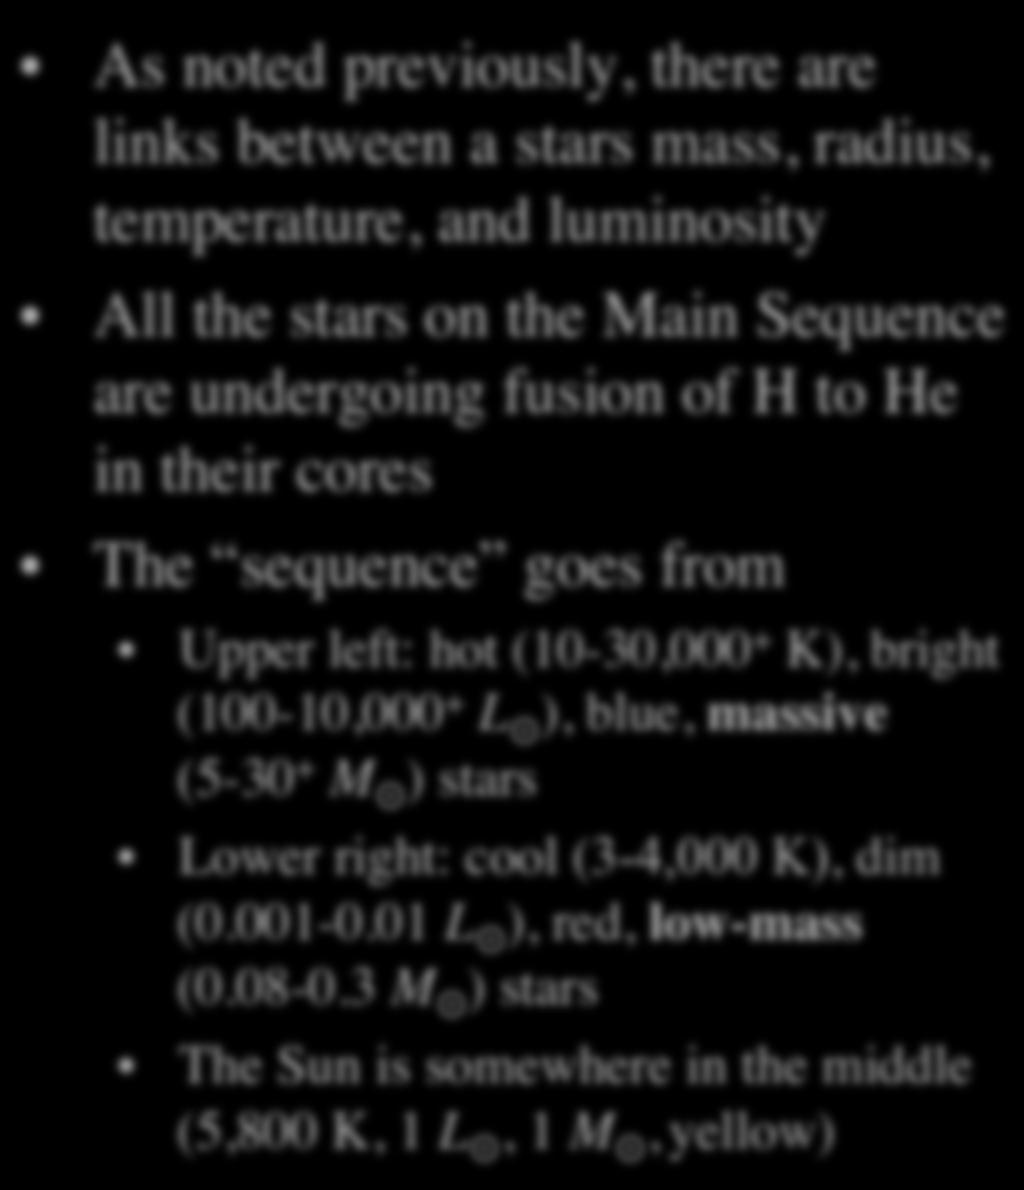 Properties of Main Sequence Stars As noted previously, there are links between a stars mass, radius, temperature, and luminosity All the stars on the Main Sequence are undergoing fusion of H to He in